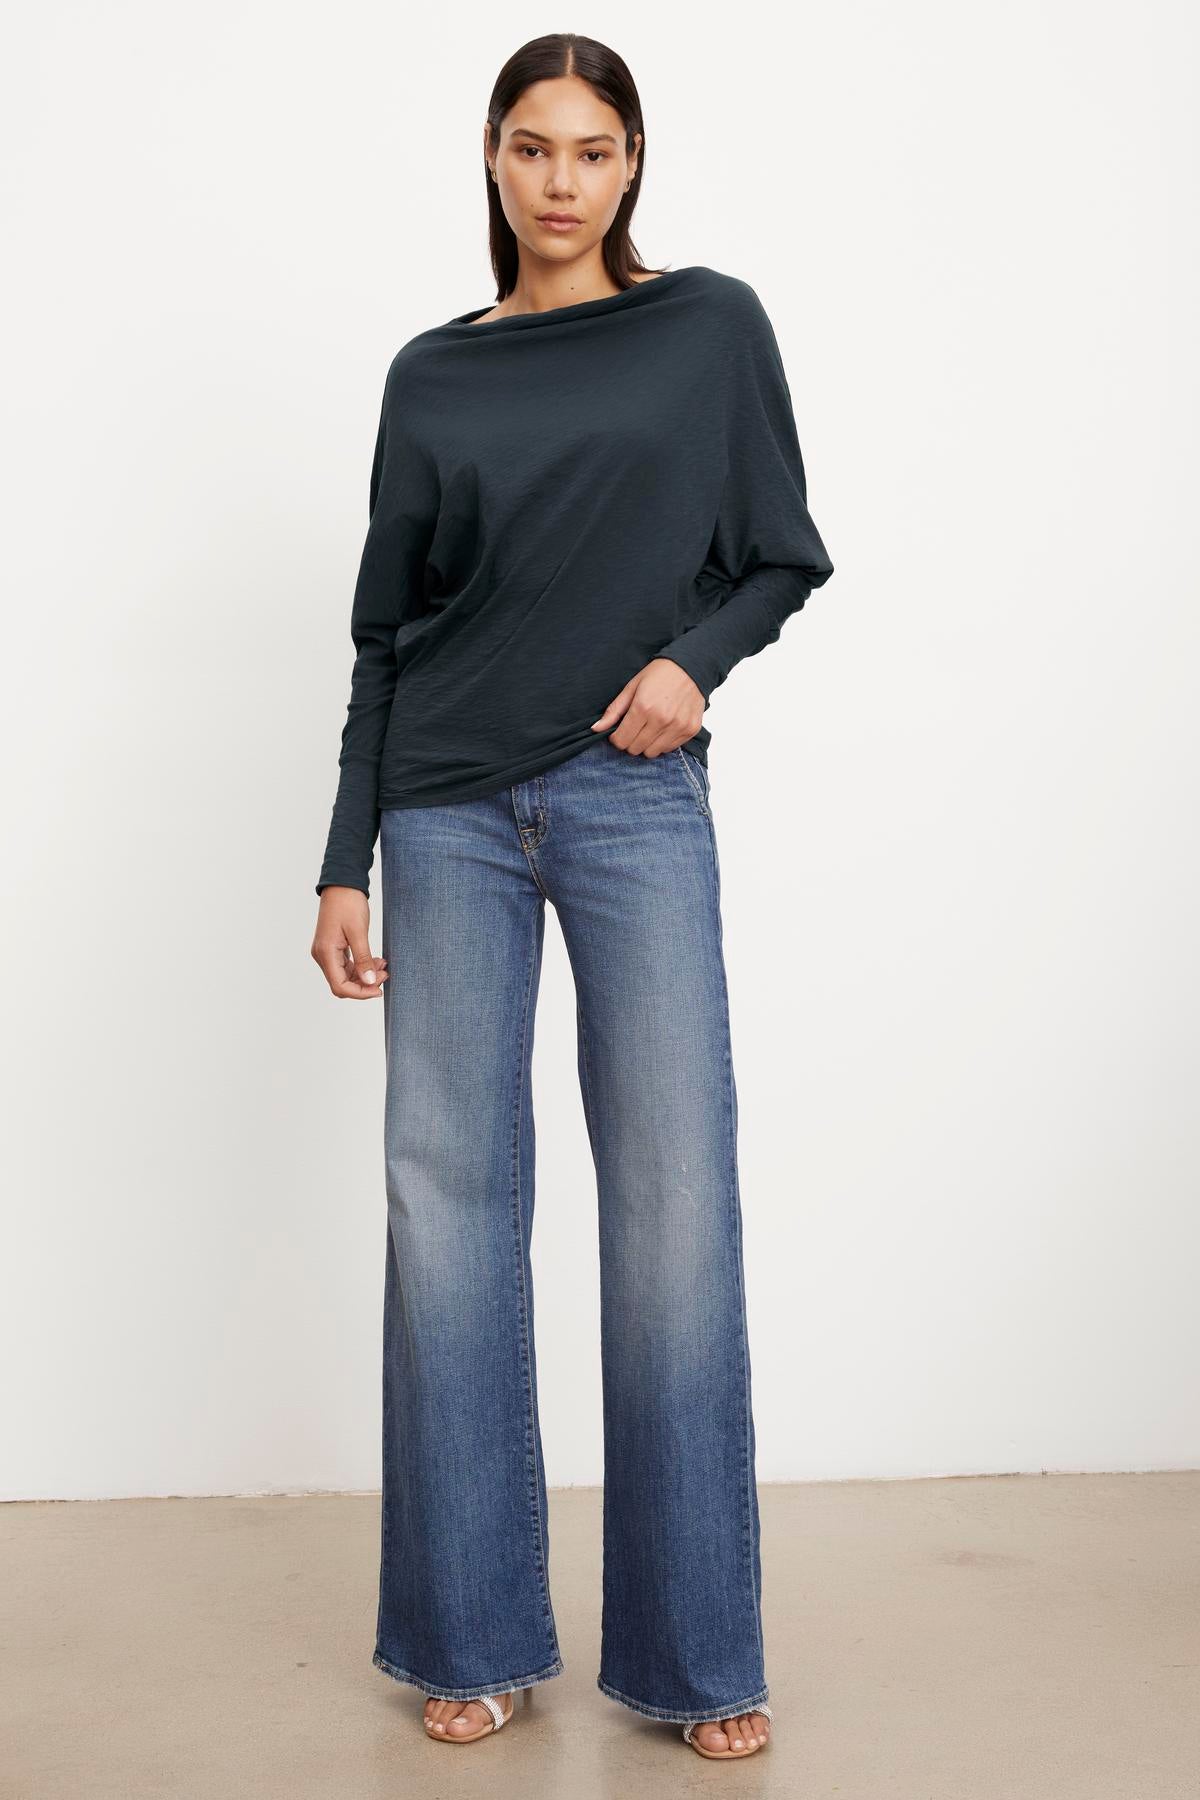 The model is wearing a Velvet by Graham & Spencer NOVALEE DOLMAN TEE with dolman sleeves and flared jeans.-35721159082177